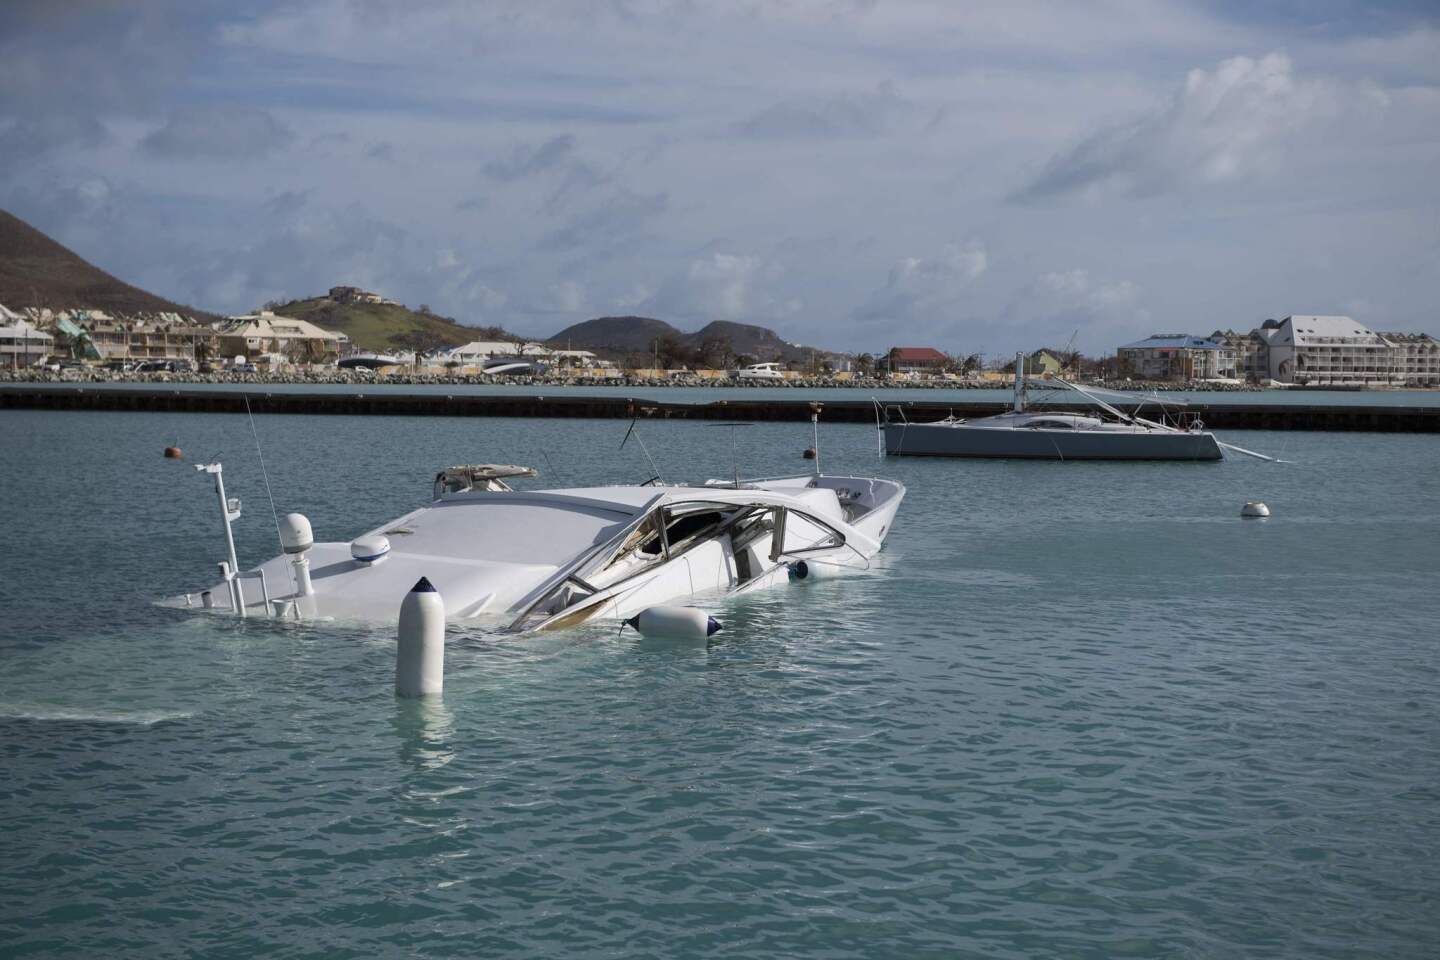 Submerged boats in Marigot on the French island of Saint Martin on Sept. 8, 2017.